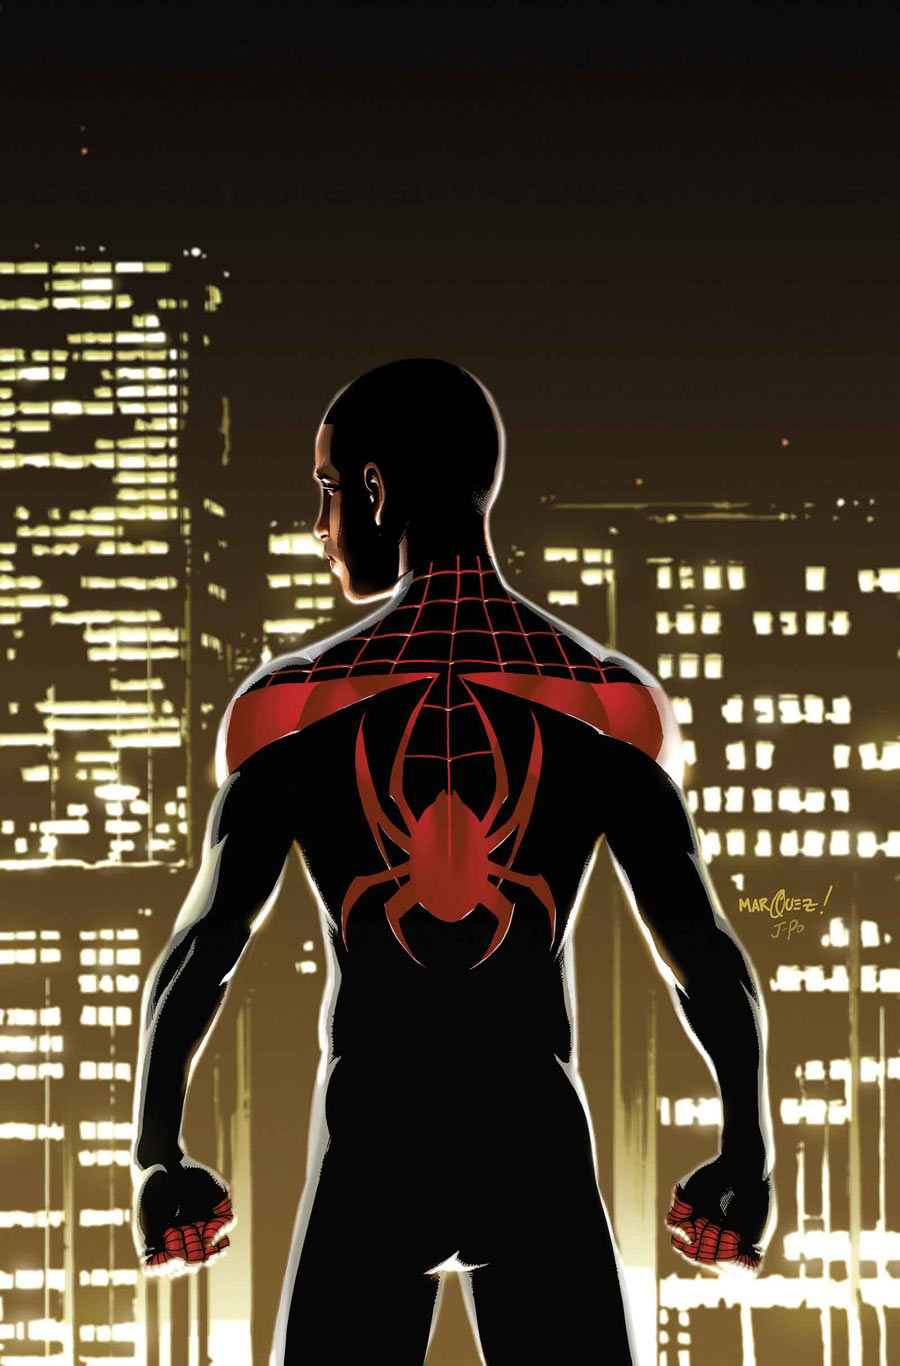 MILES MORALES: THE ULTIMATE SPIDER-MAN #1